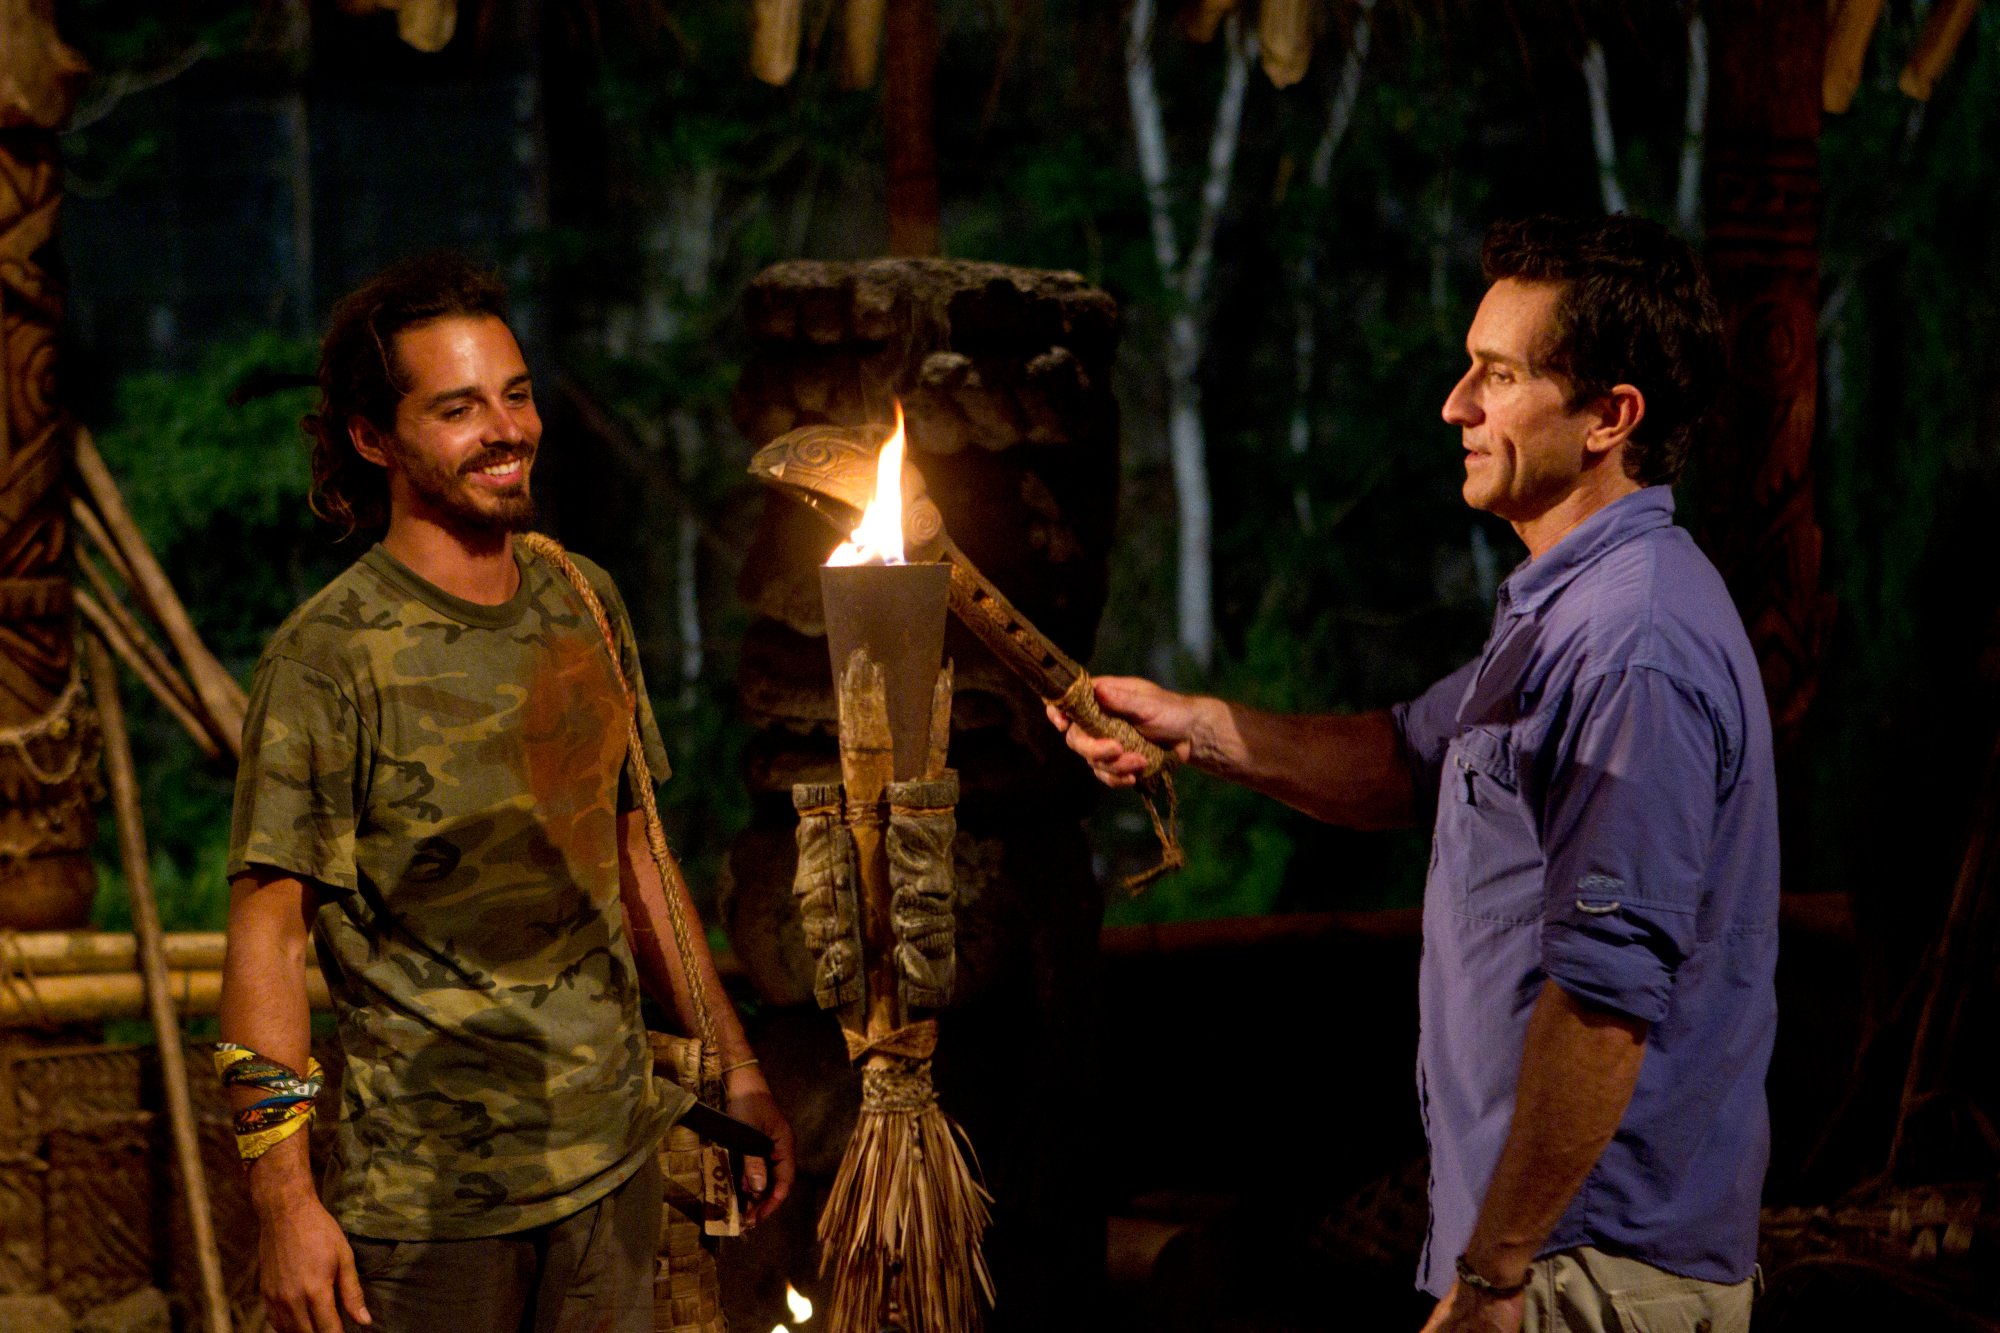 Ozzy Lusth, who one of the most popular 'Survivor' castaways in the show's history, has his torch snuffed by host Jeff Probt in 'Survivor: South Pacific.'